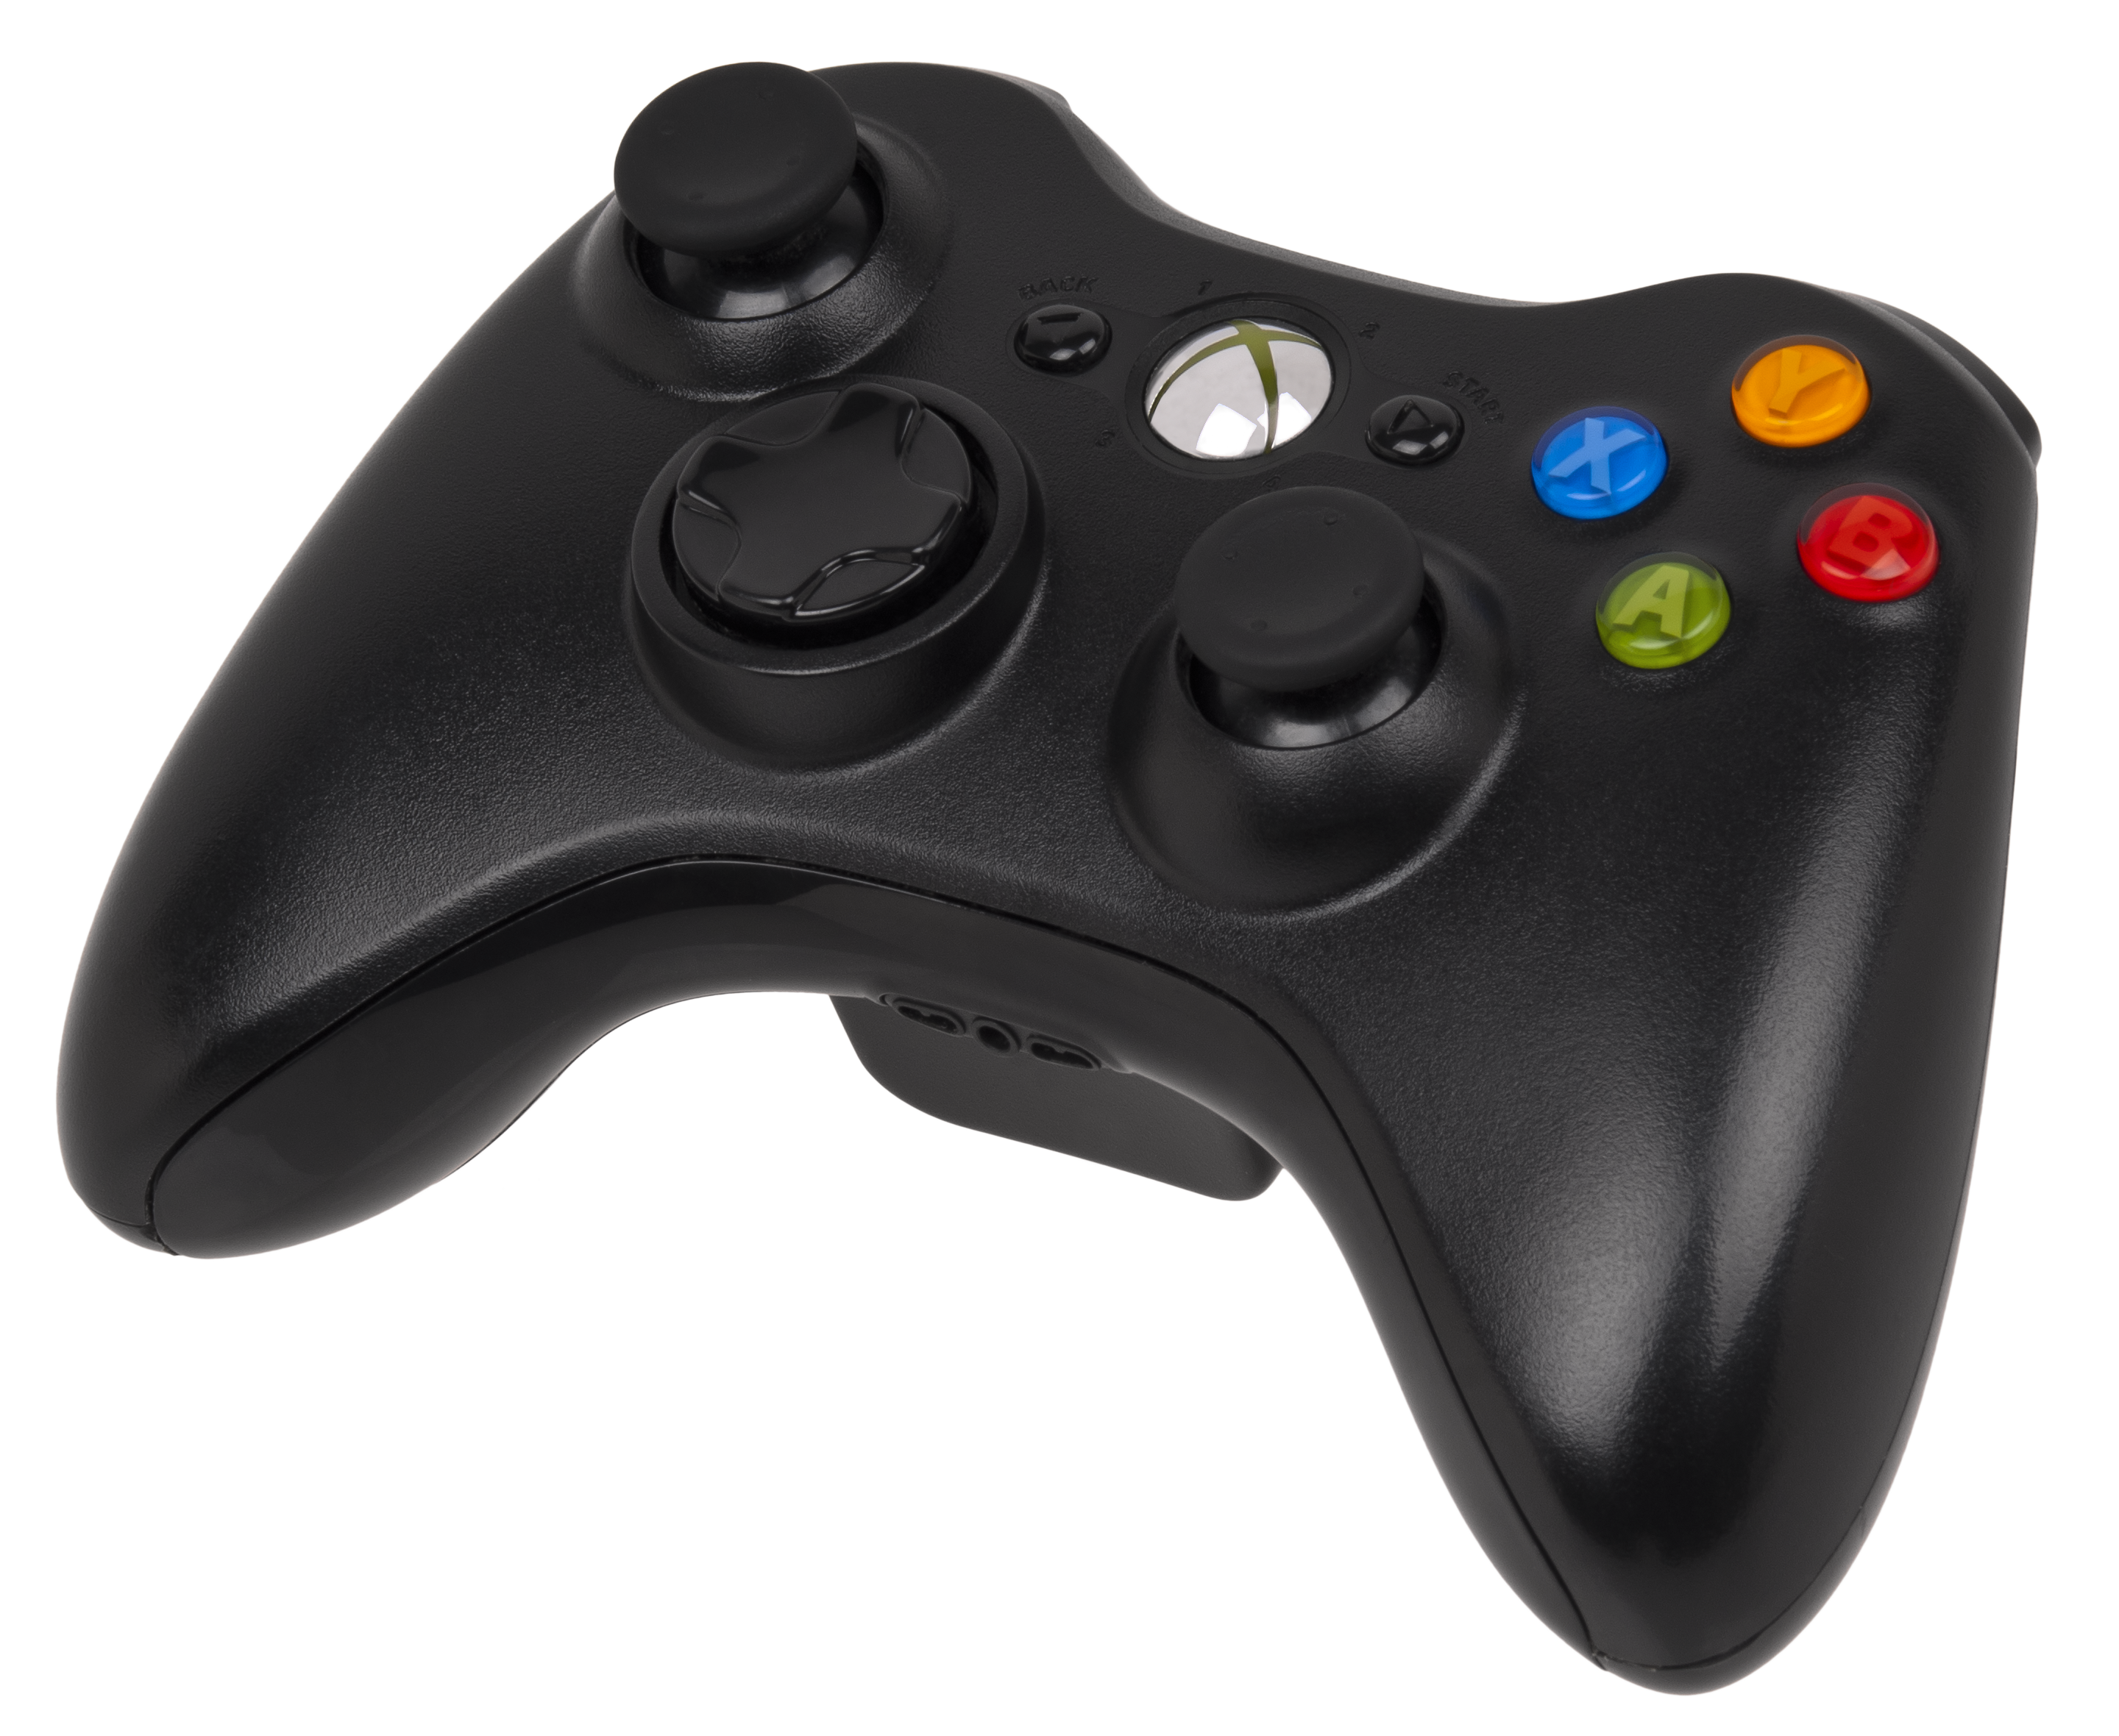 install xbox 360 rock candy controller